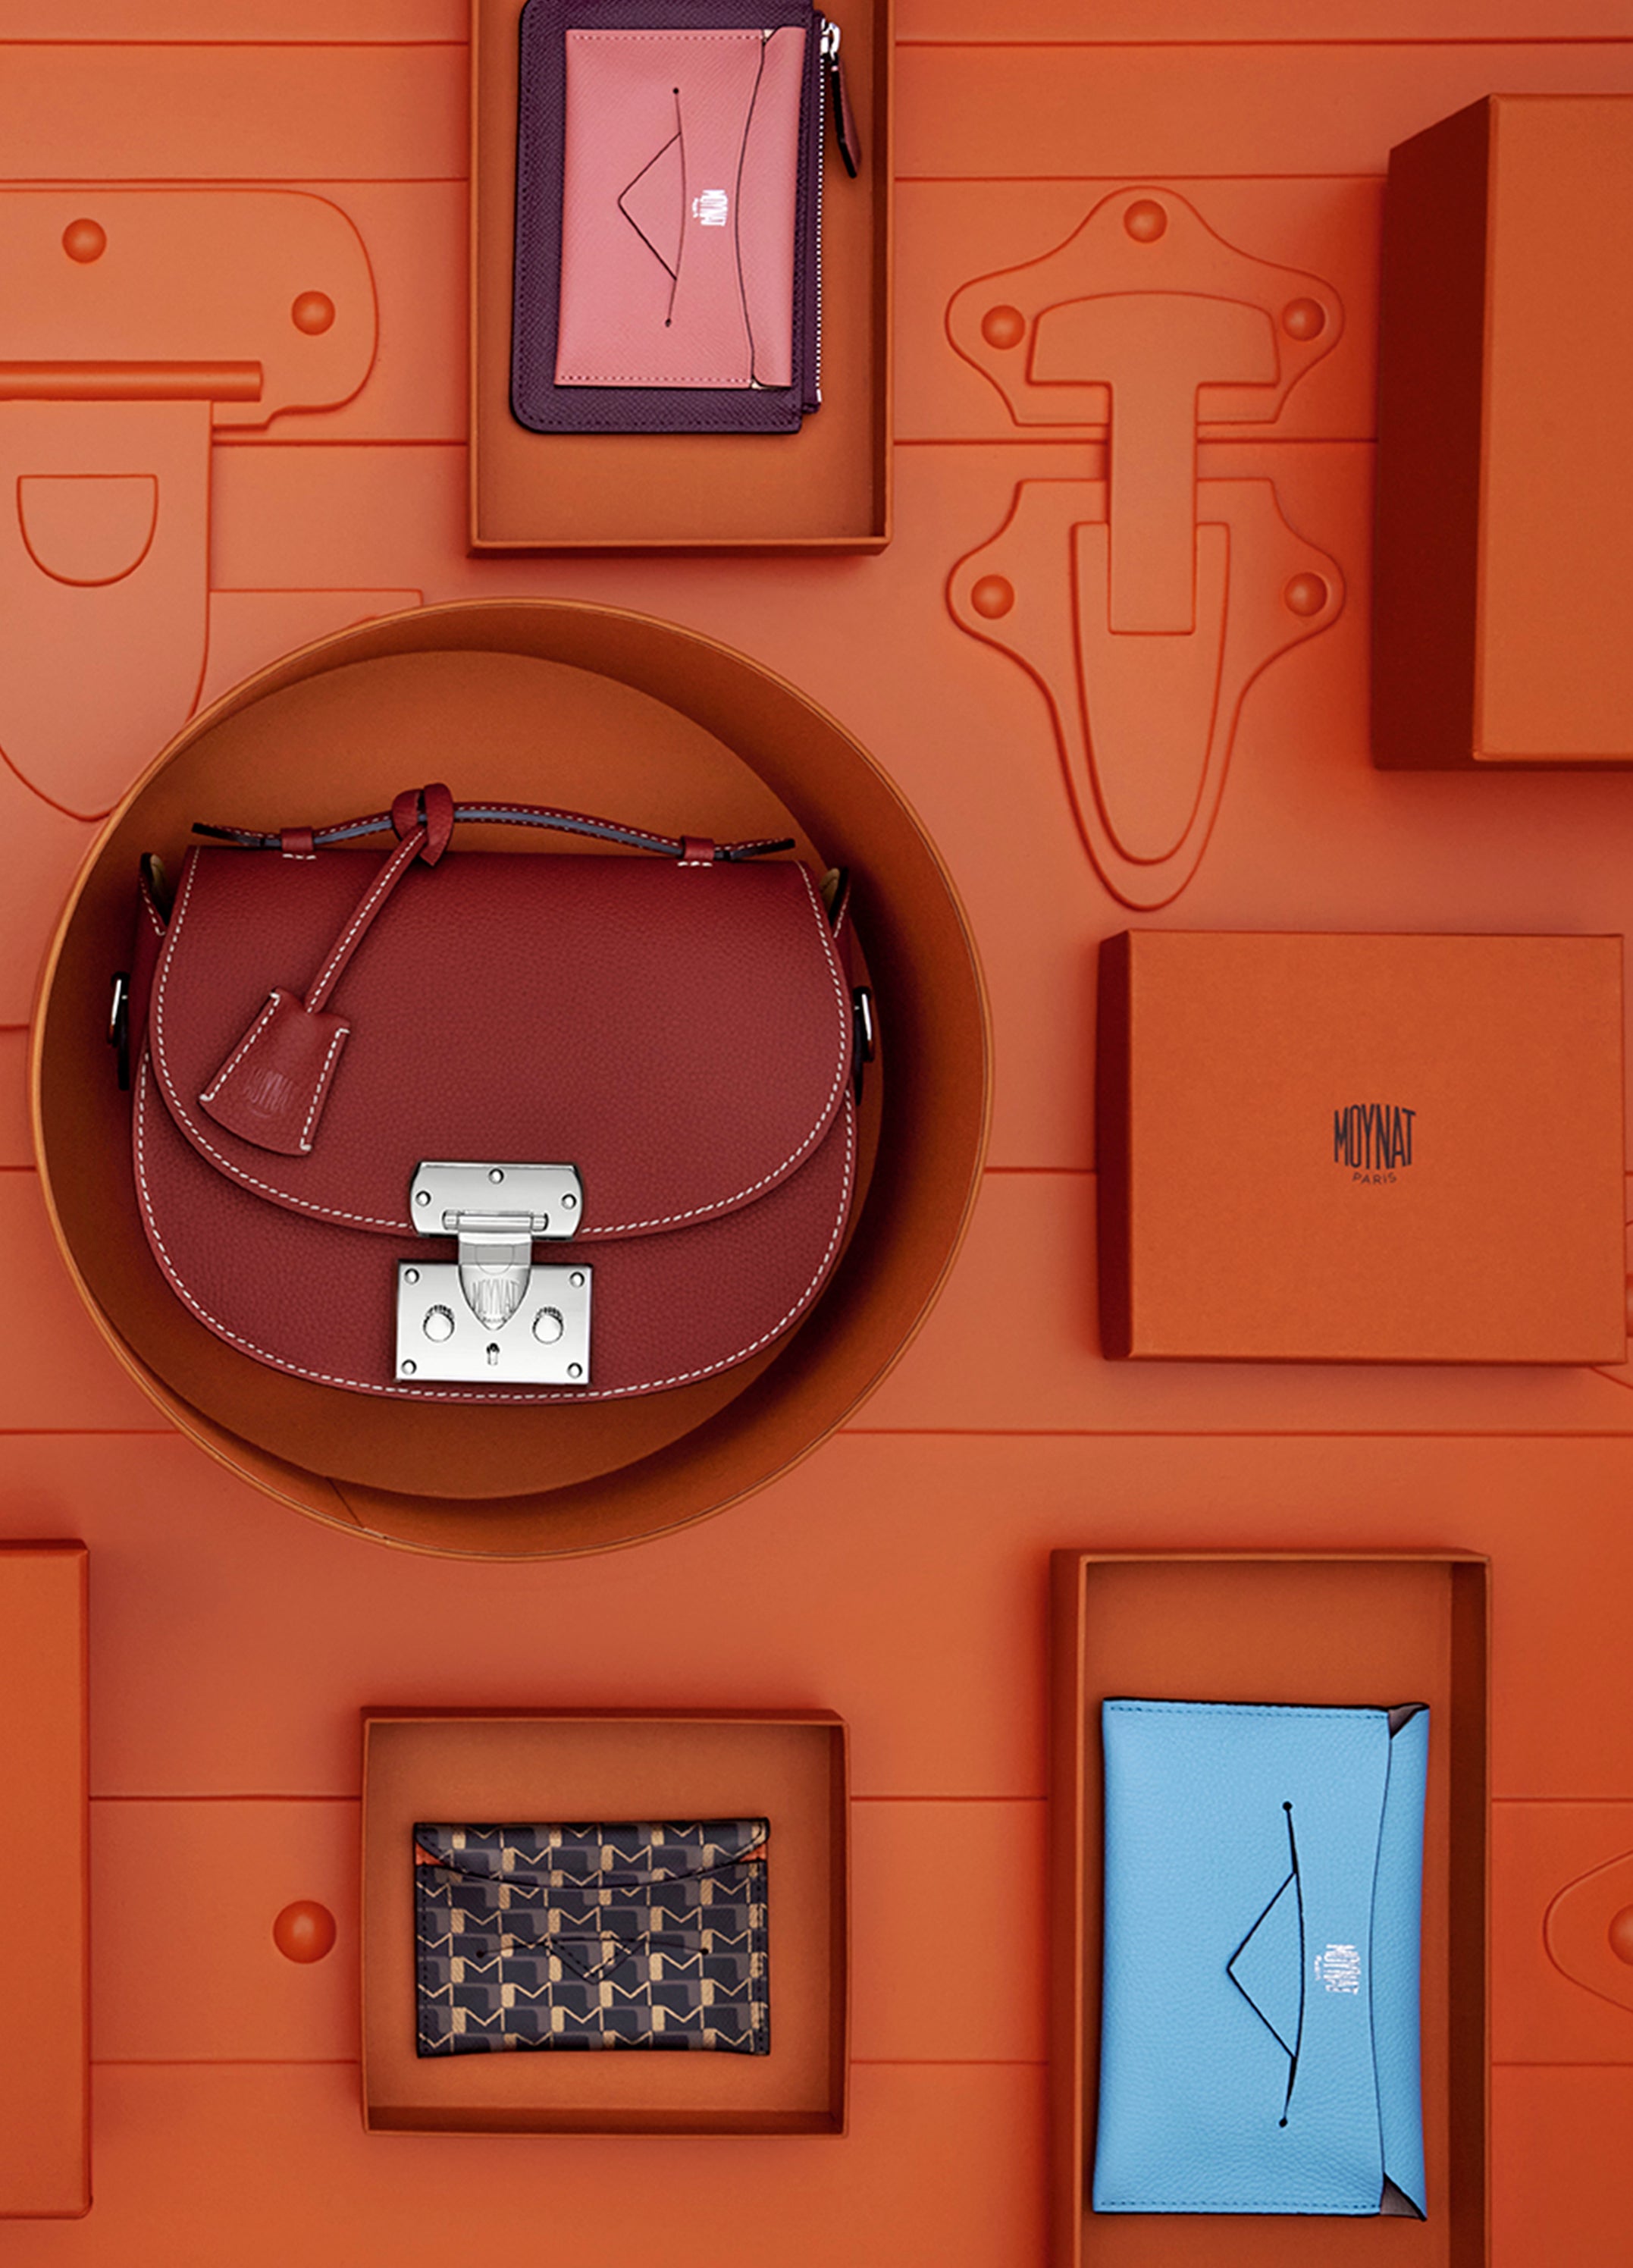 A quick trip to Moynat Paris for this English Garden Collection